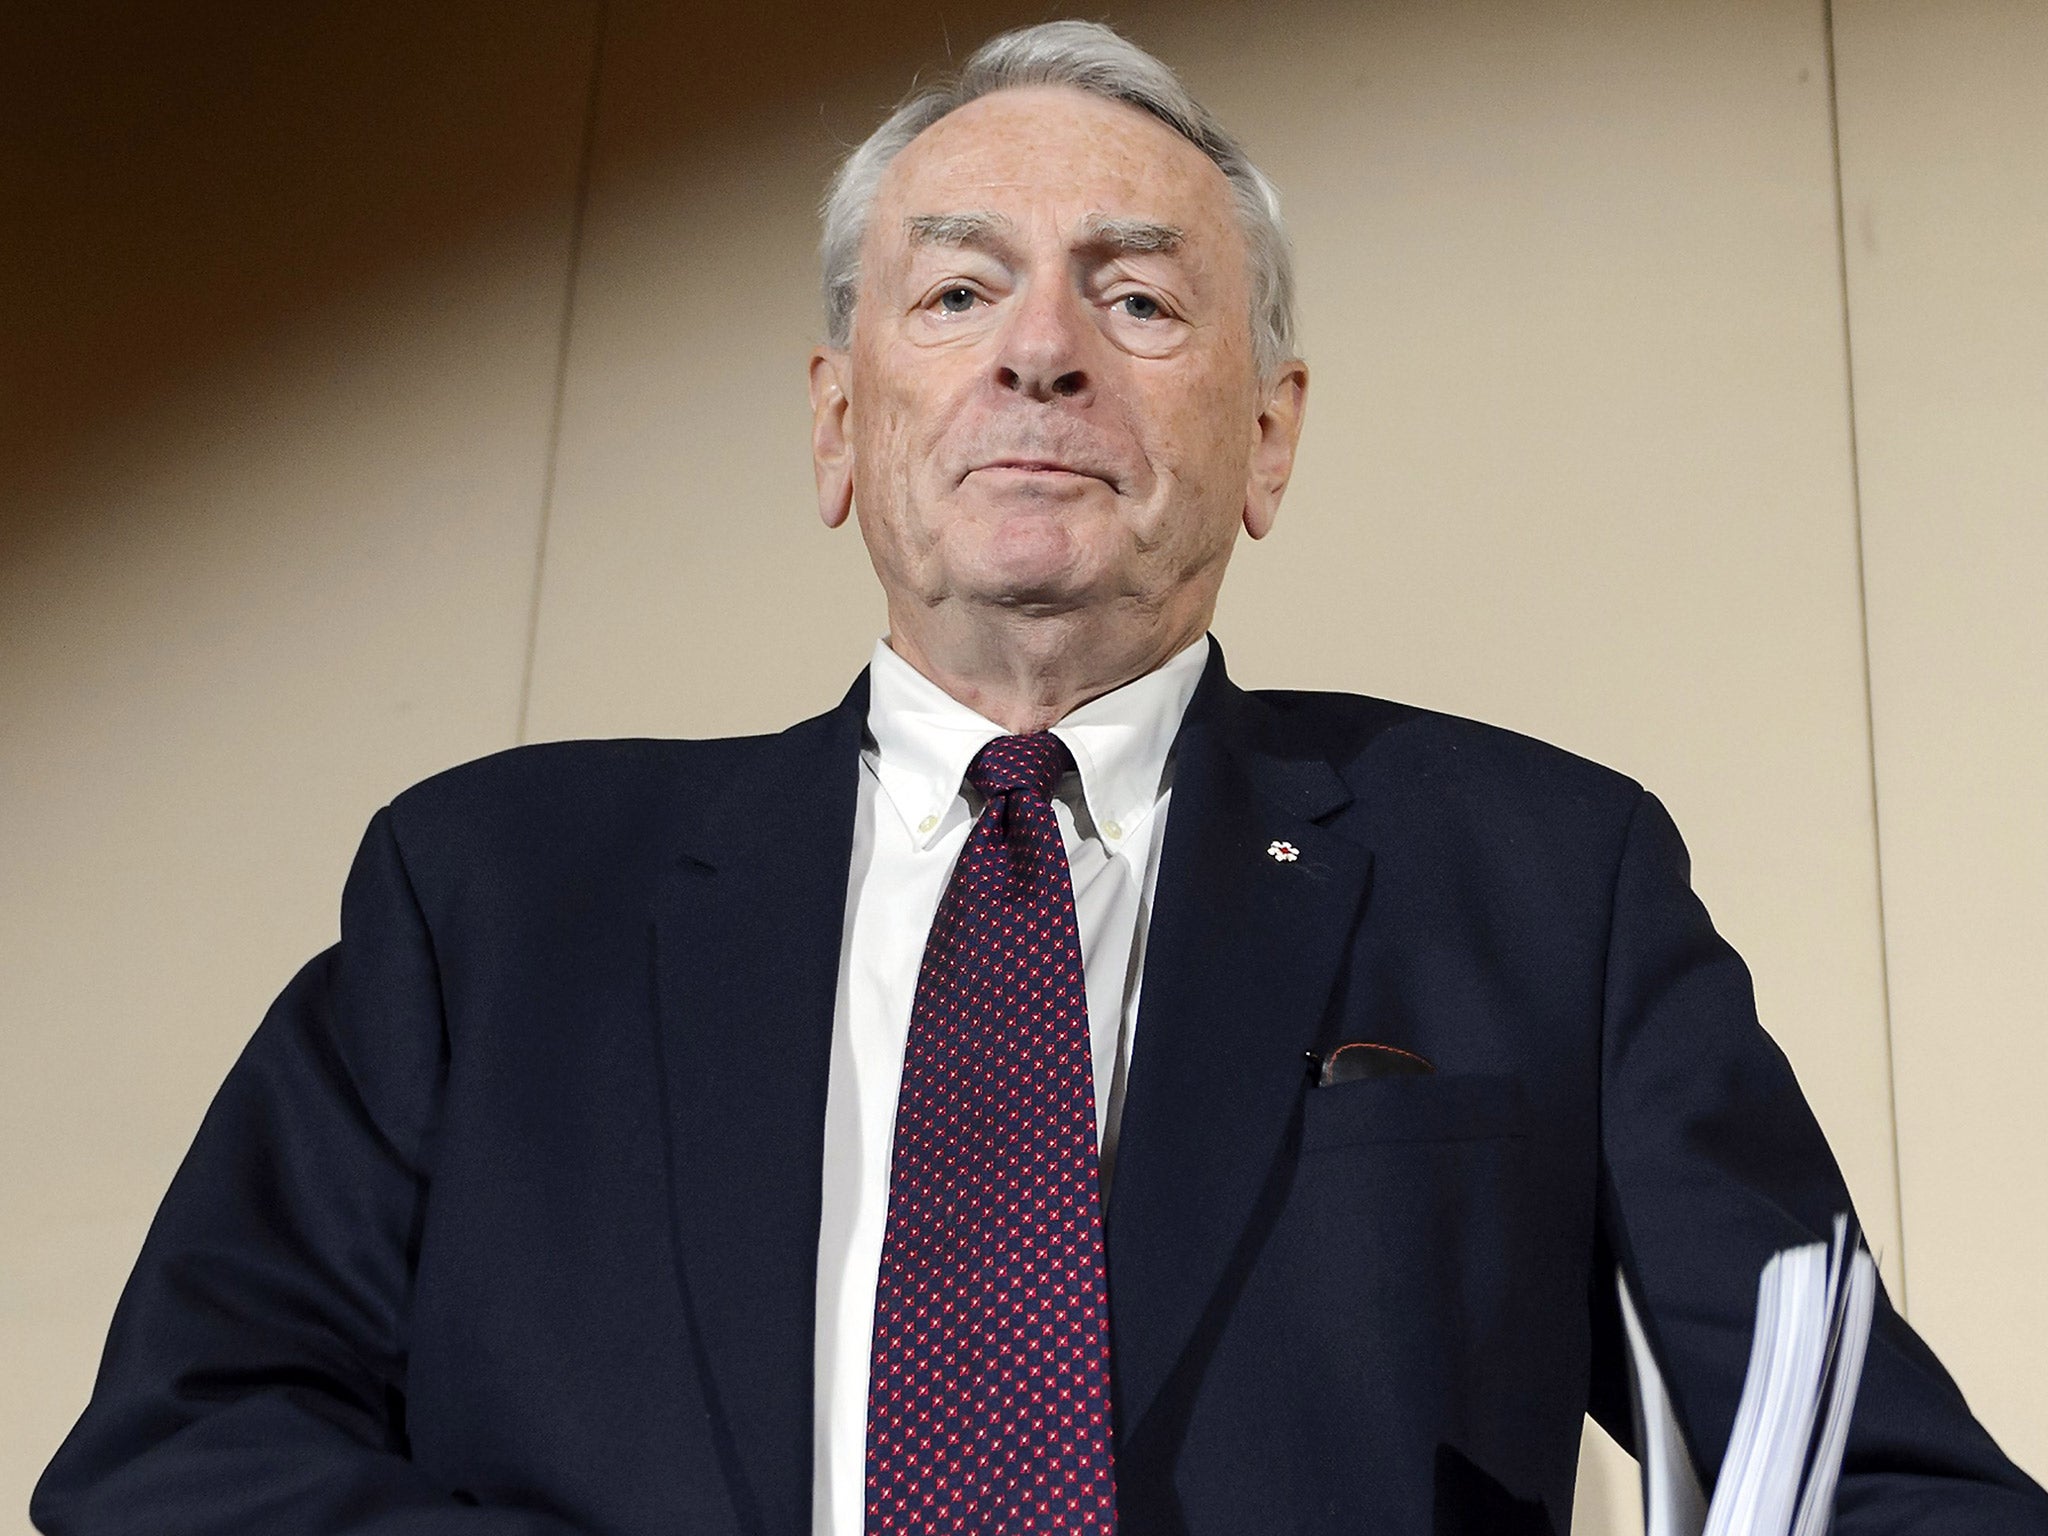 The pitbull approach: Dick Pound, chairman of the Wada independent commission